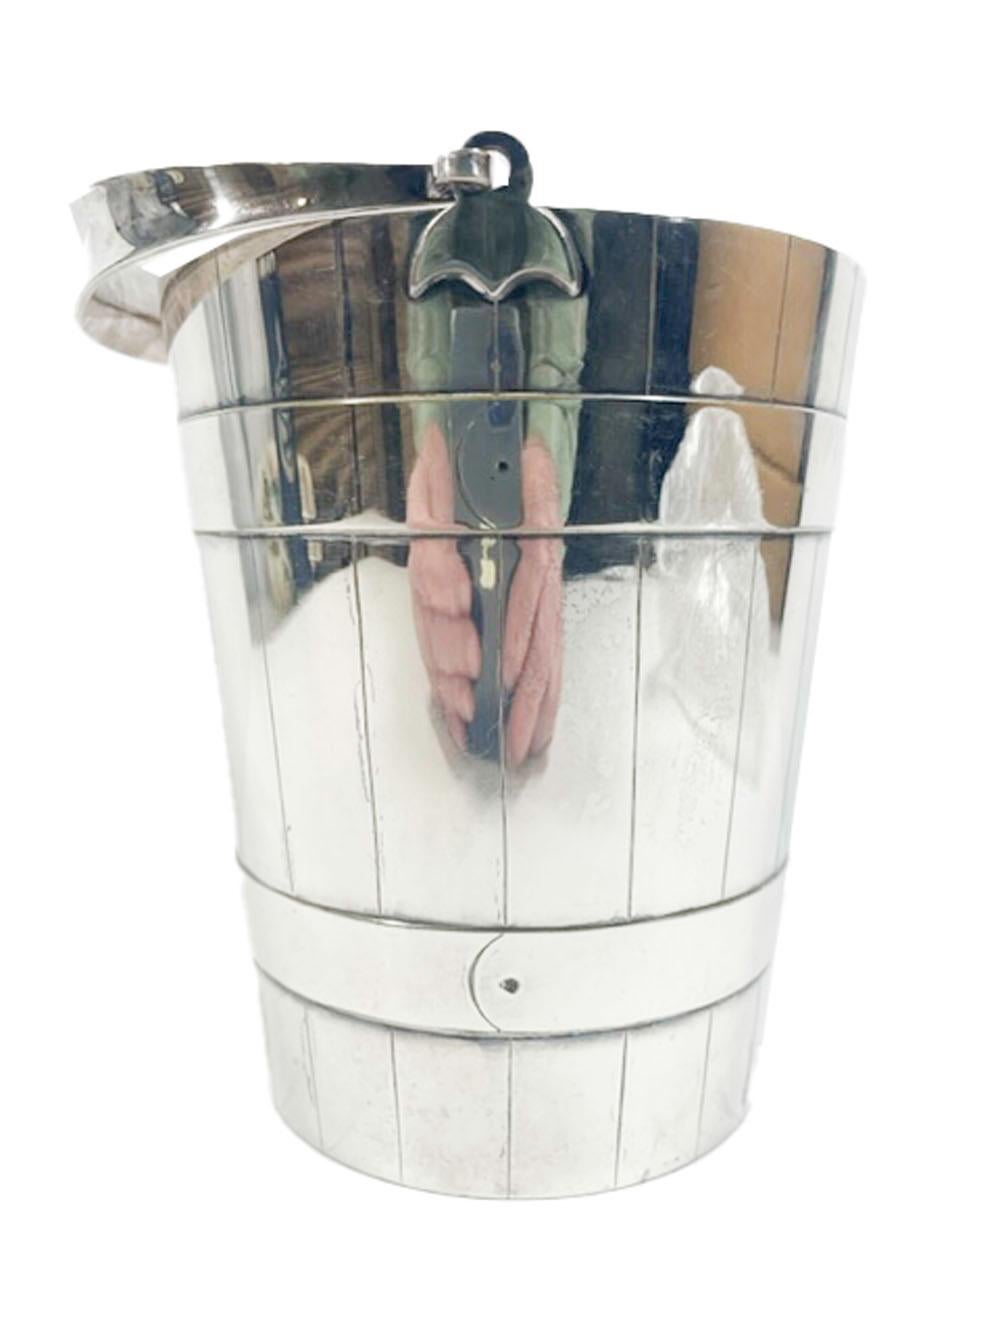 Edwardian silver plate ice bucket and tongs. The bucket with a bail handle and interior strainer is modeled to resemble a staved and banded pail, the tongs have acanthus leaves and bird talons at the ends.